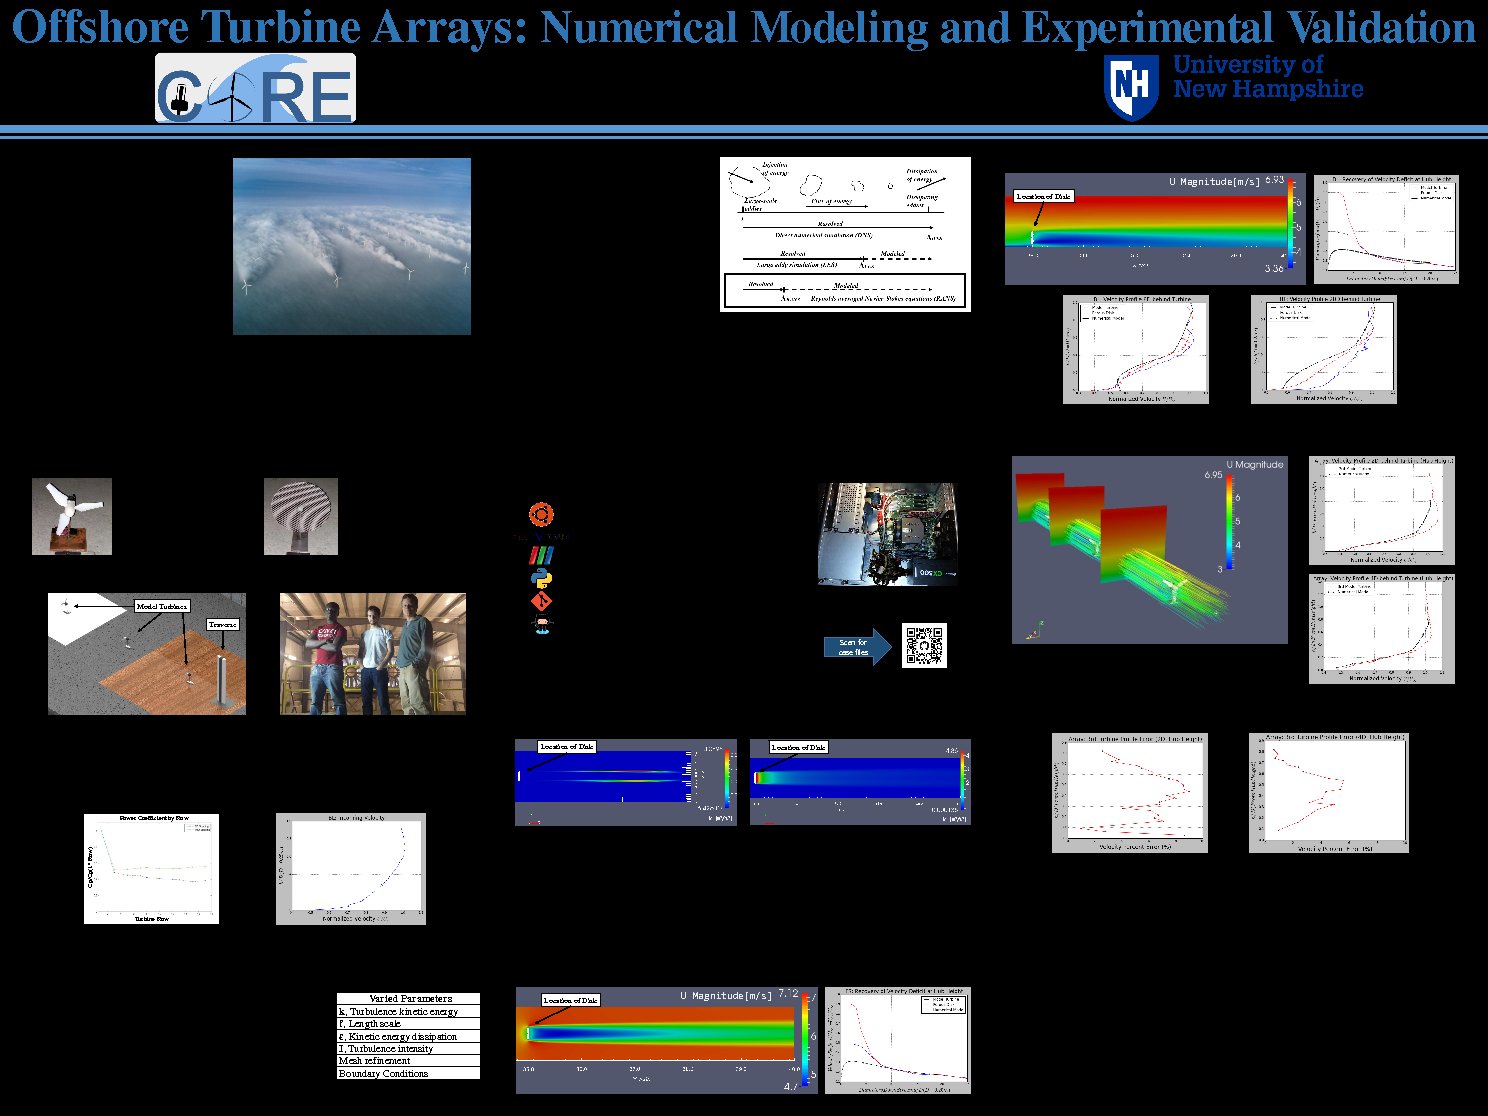 Offshore Turbine Arrays: Numerical Modeling And Experimental Validation by whb7